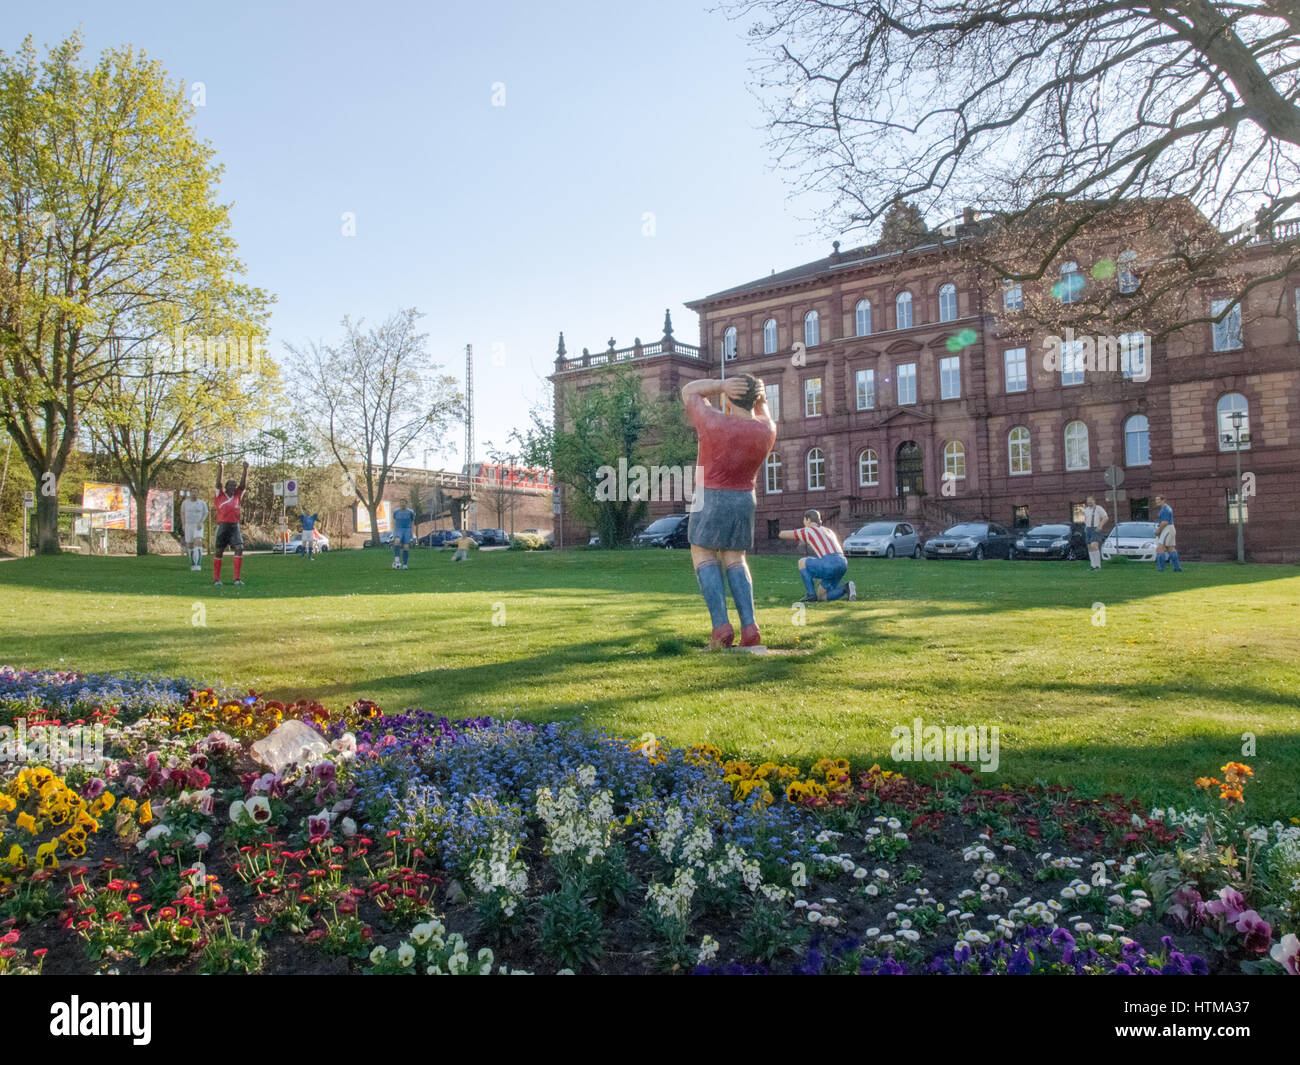 Kaiserslautern, Germany - April 18, 2015: Statues of soccer players are positioned on a public garden. Symbolize the passion that lives this city for  Stock Photo